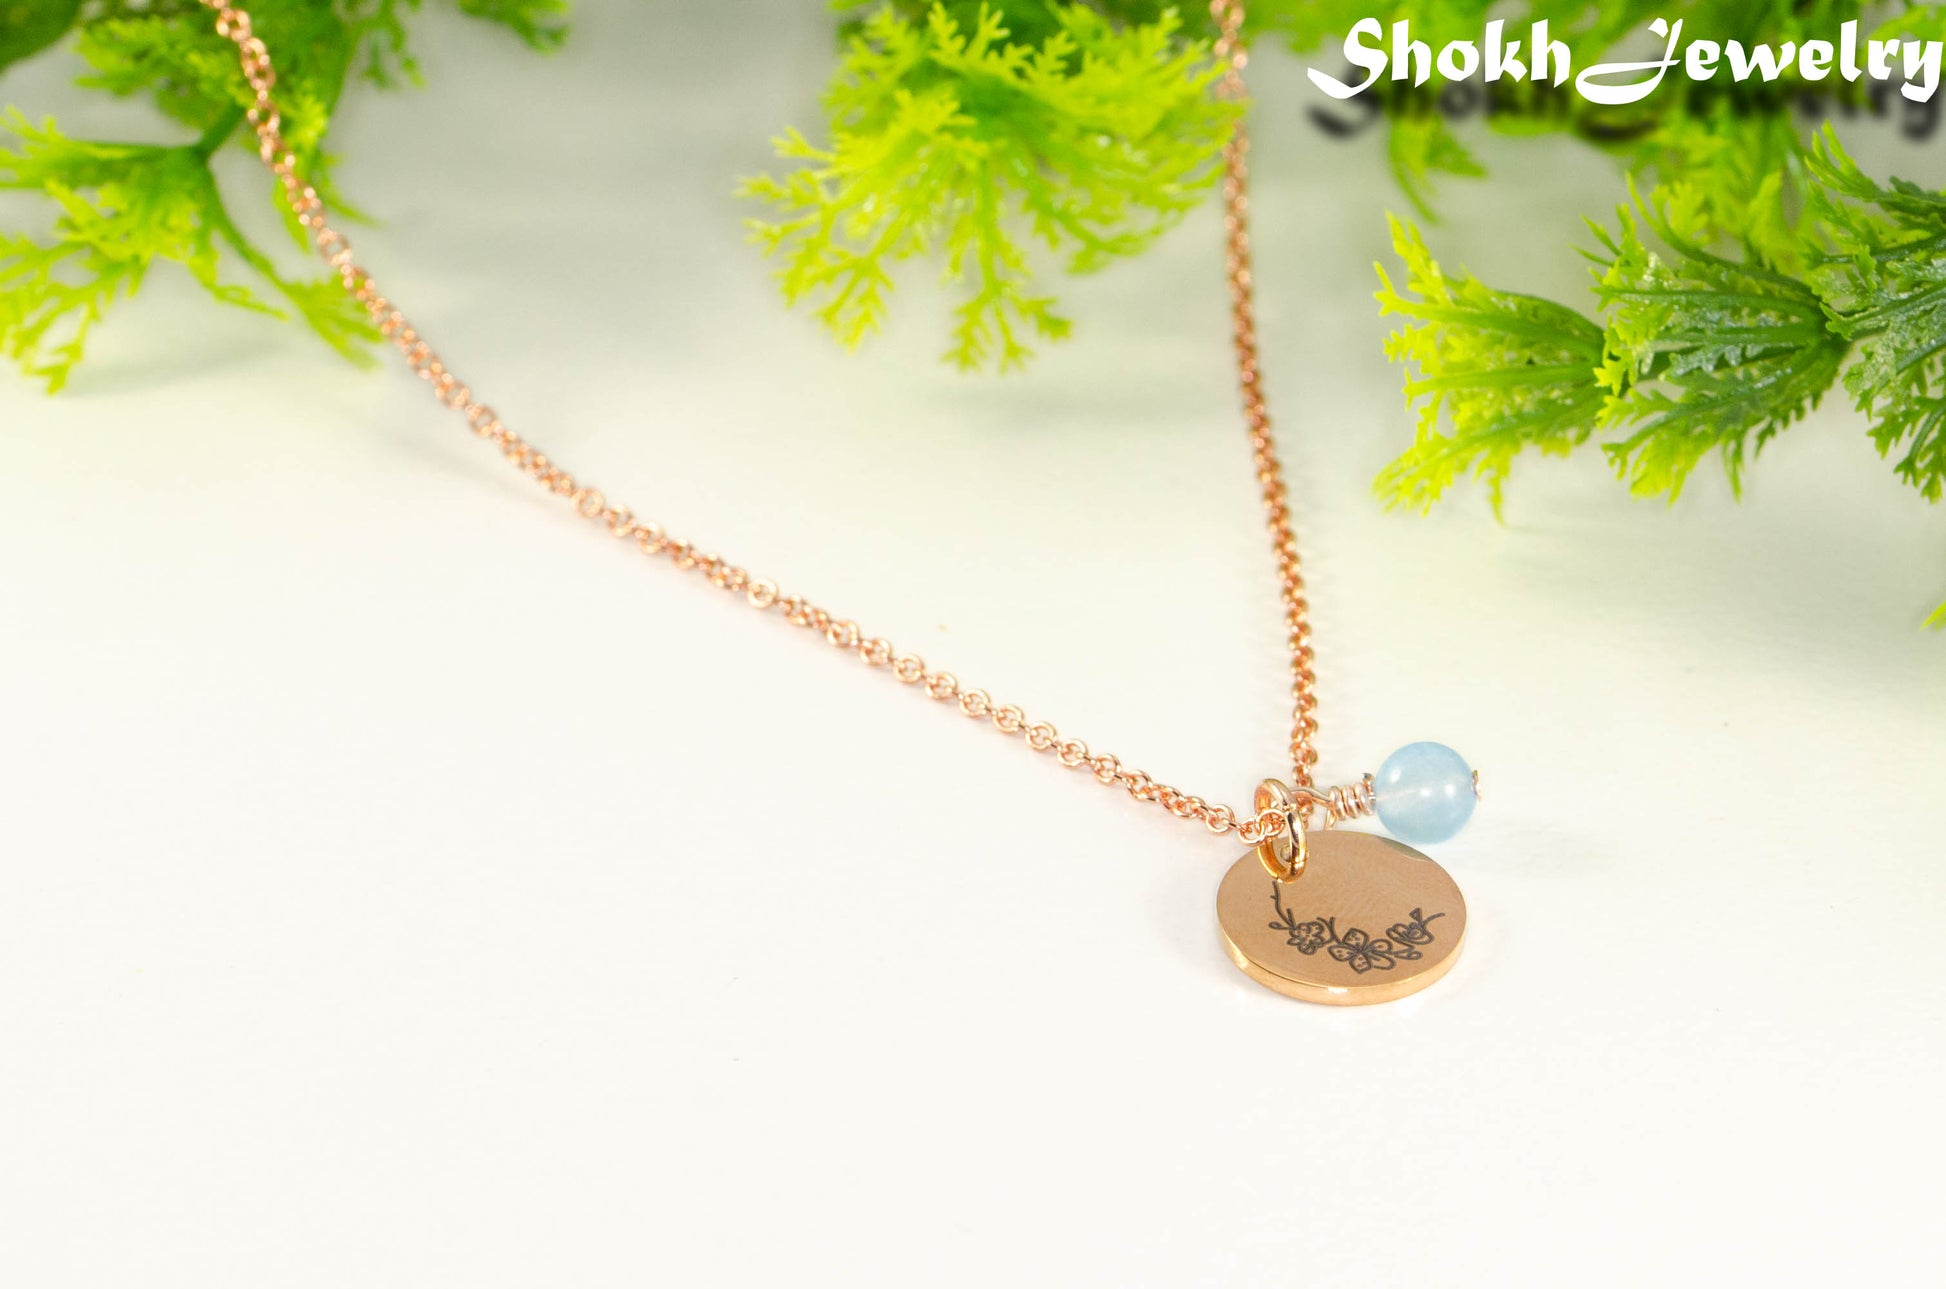 Close up of Rose Gold Plated March Birth Flower Necklace with Aquamarine Birthstone Pendant.